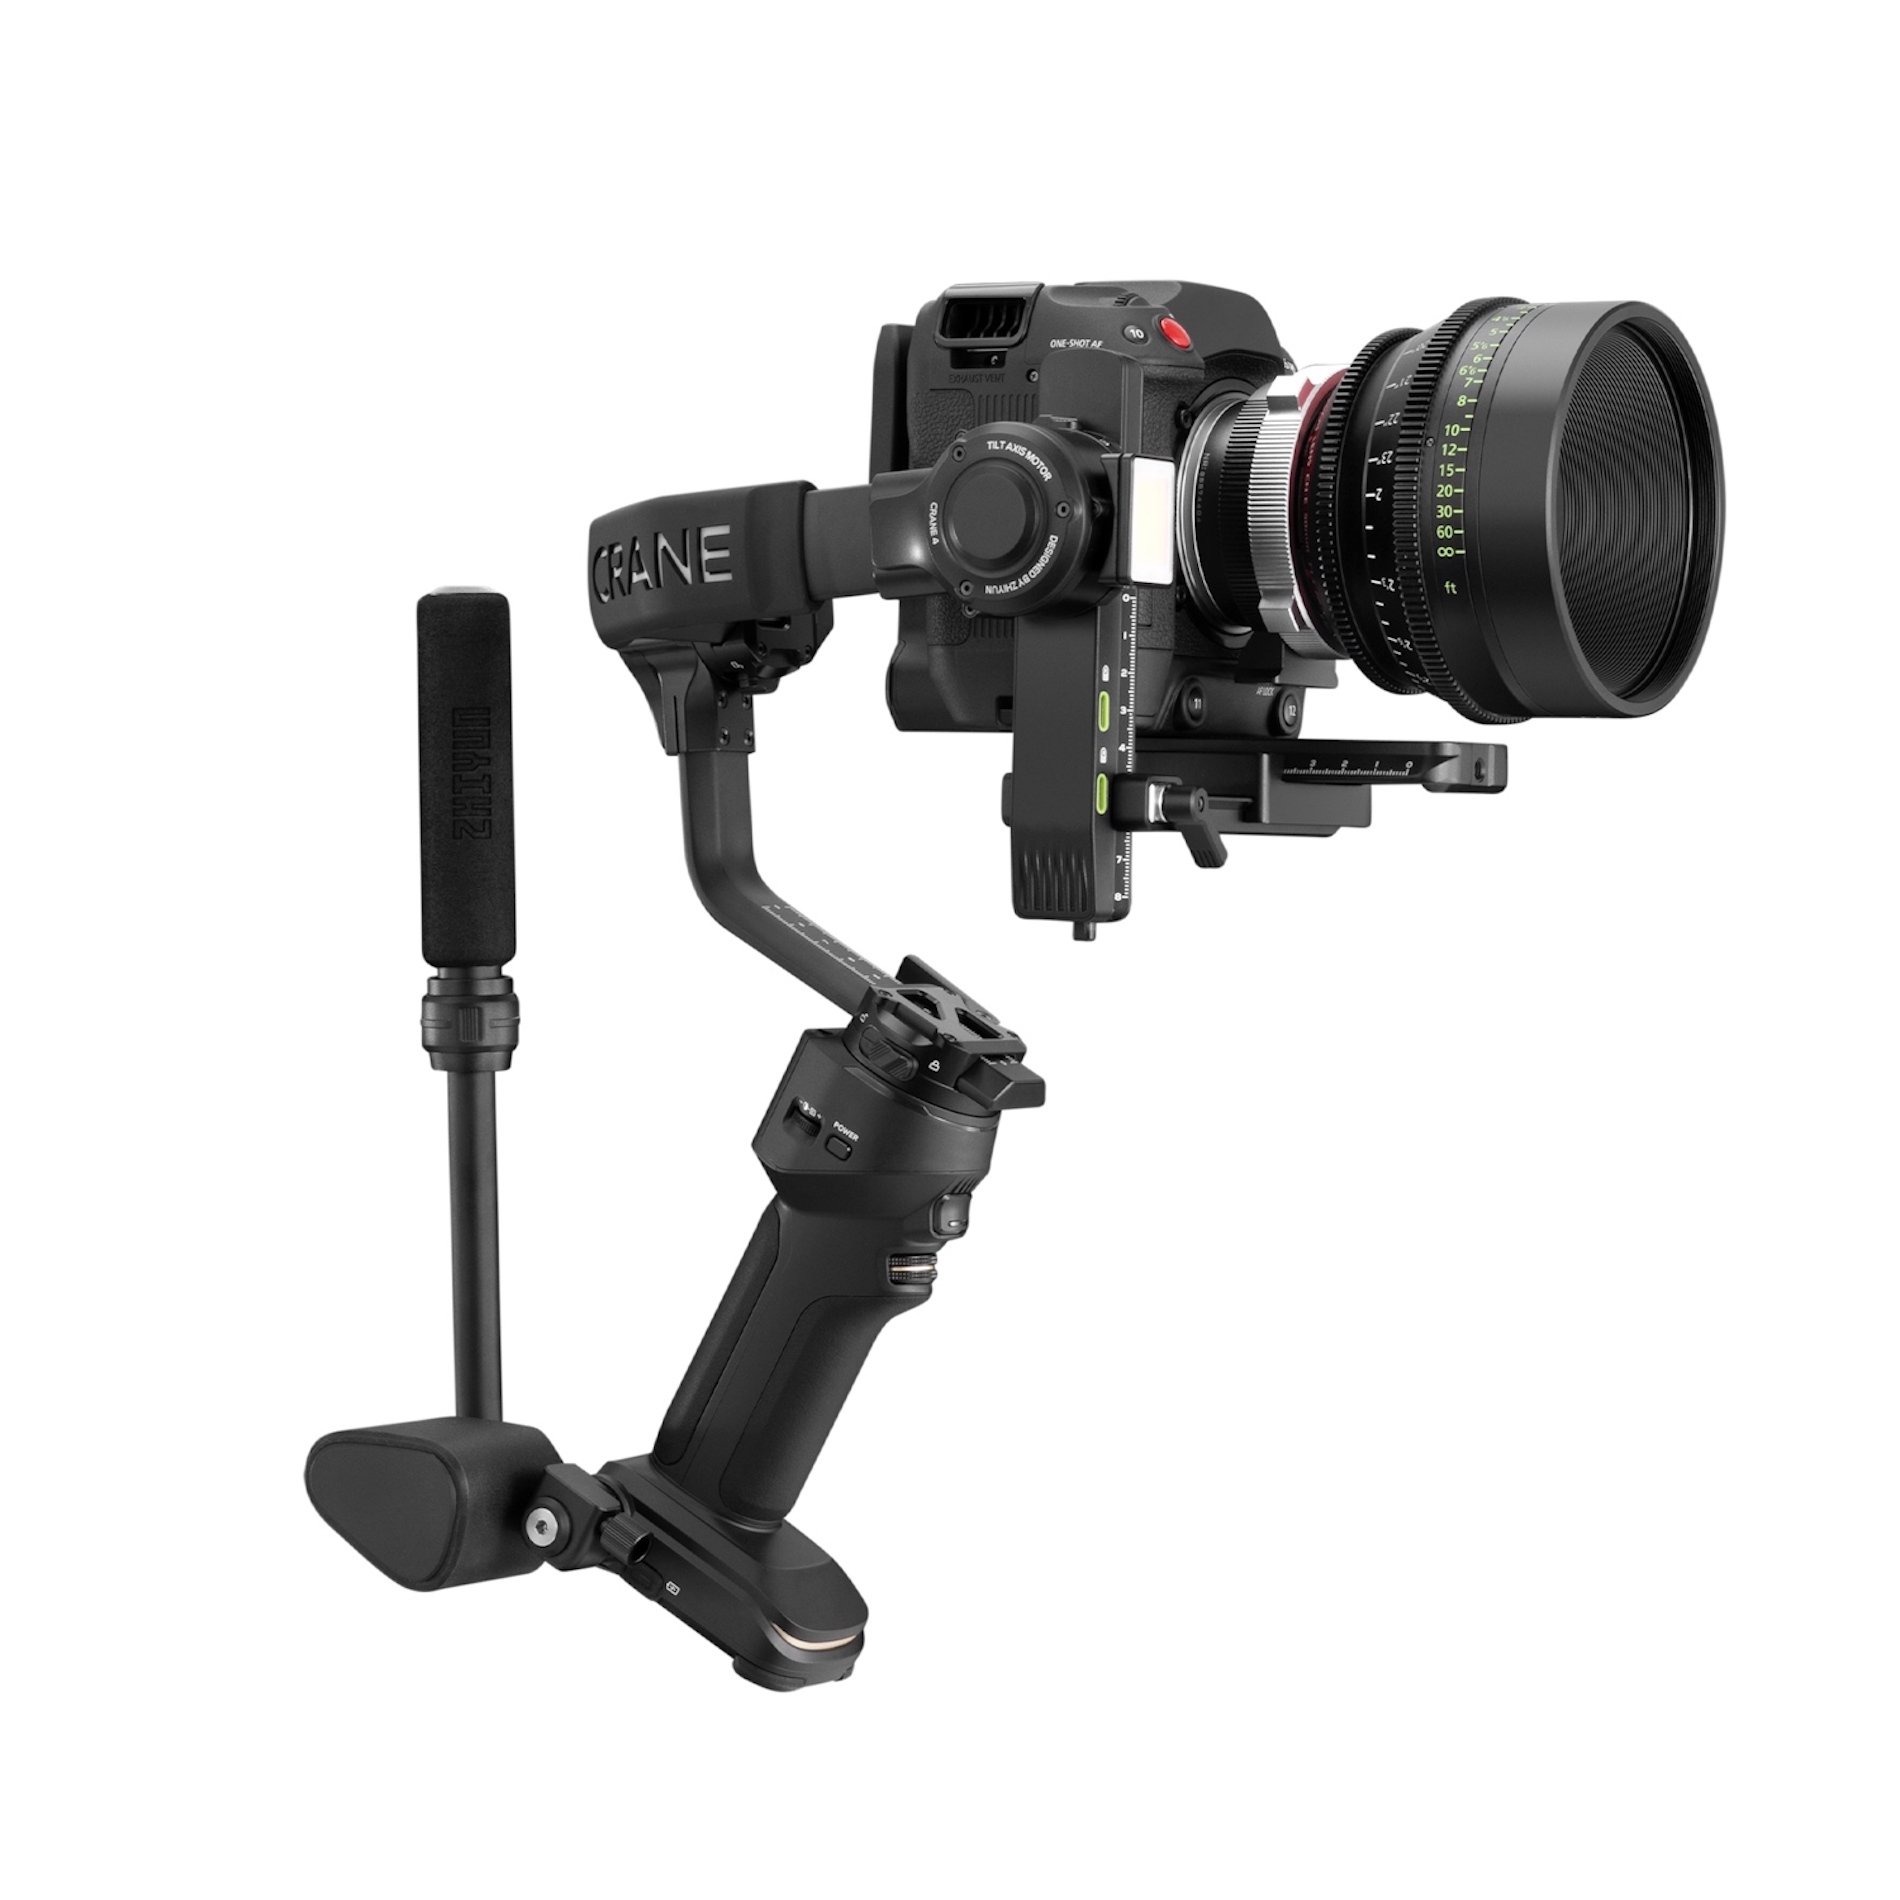 Zhiyun Unveils 3 Solutions - The American Society of Cinematographers ...